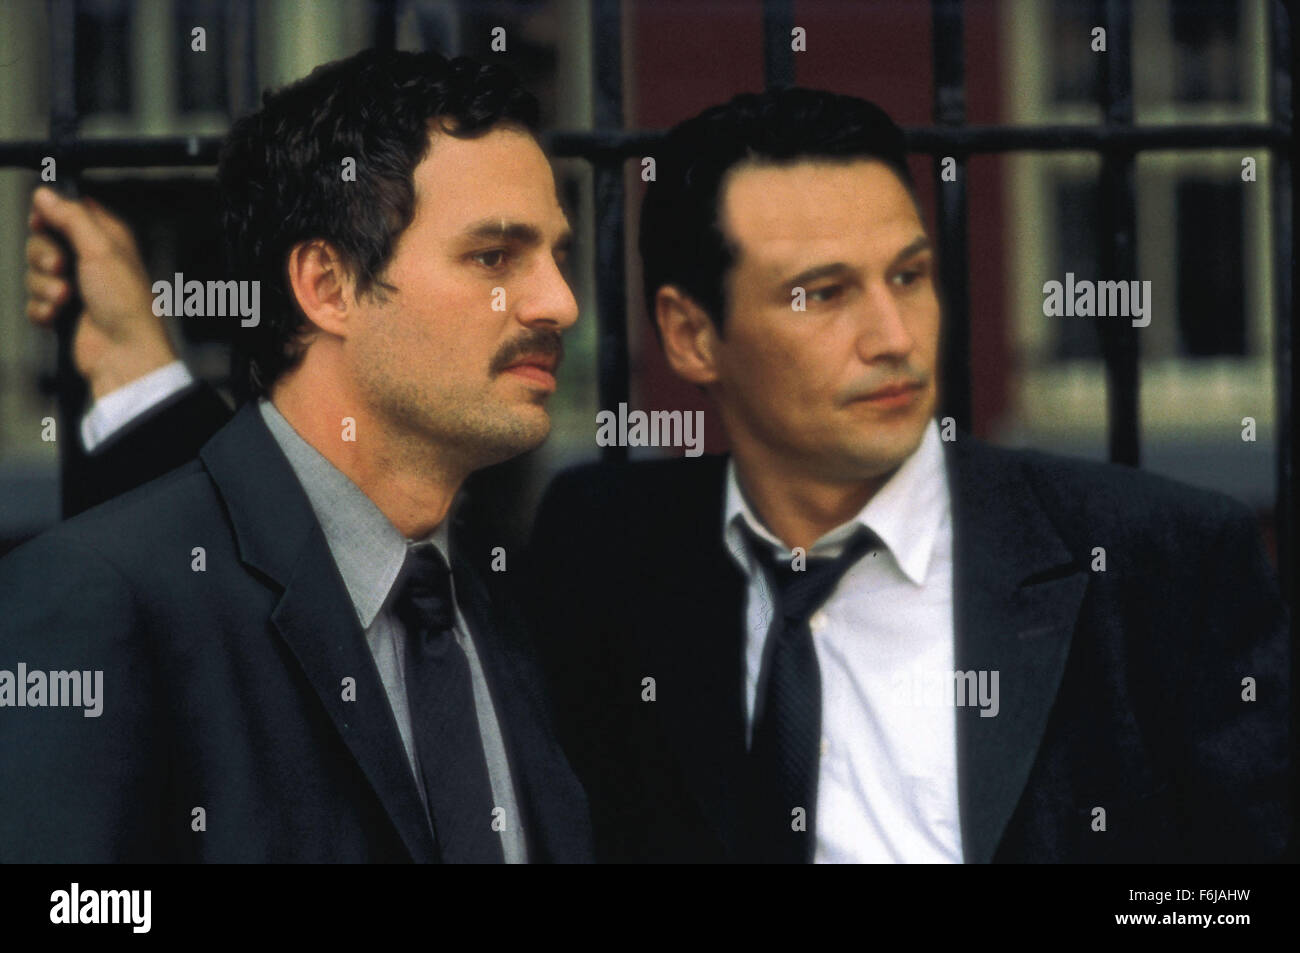 Jul 07, 2003; Hollywood, CA, USA; MARK RUFFALO and NICK DAMICI star as Detectives Giovanni Malloy and Richard Rodriguez in the thrilling crime mystery 'In the Cut' directed by Jane Campion. Stock Photo